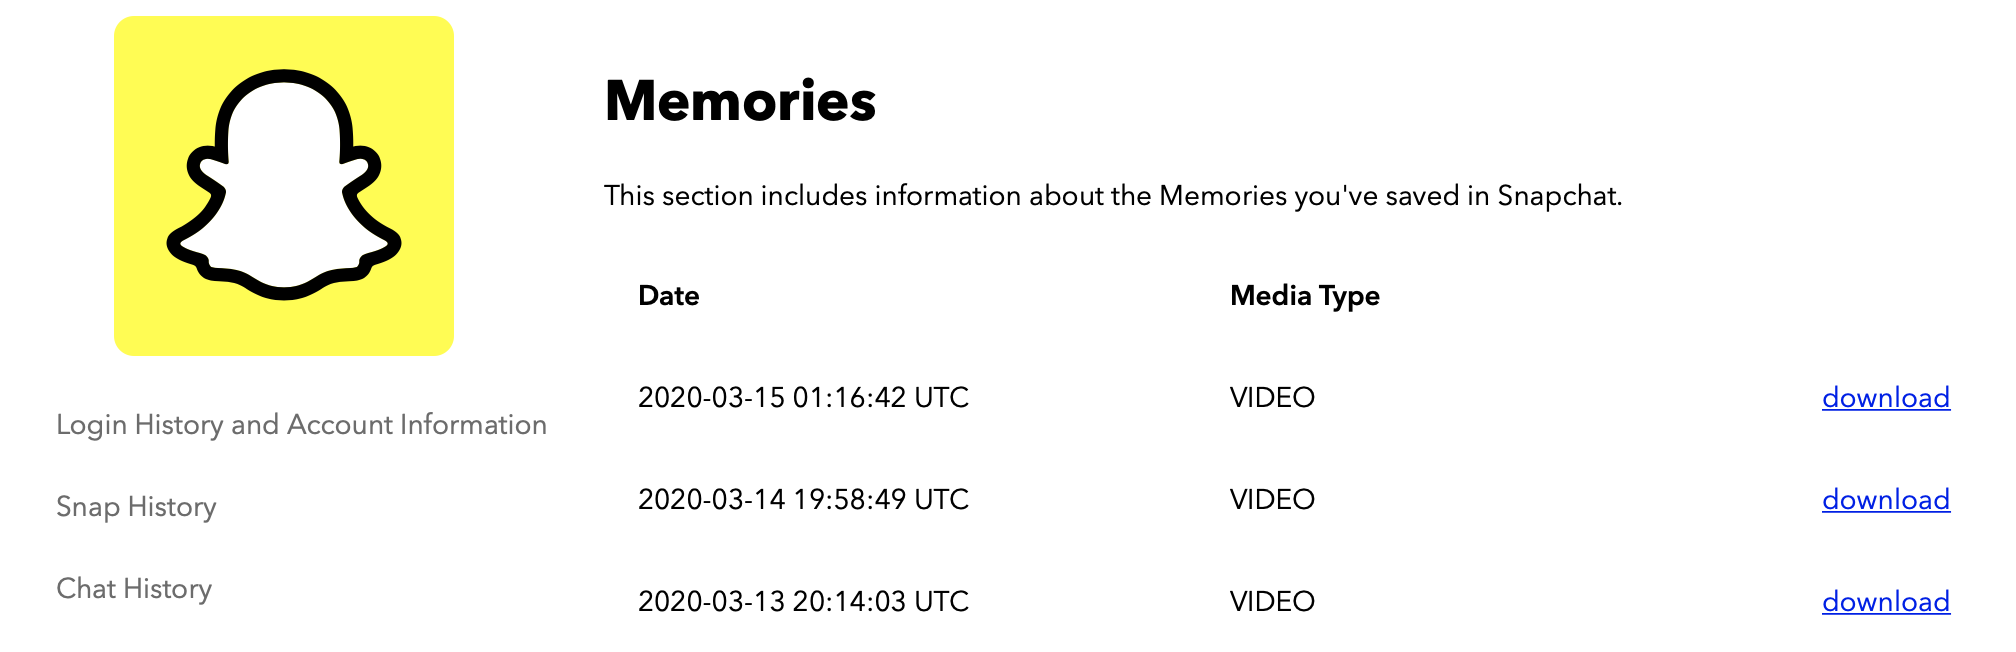 how-to-download-all-snap-memories